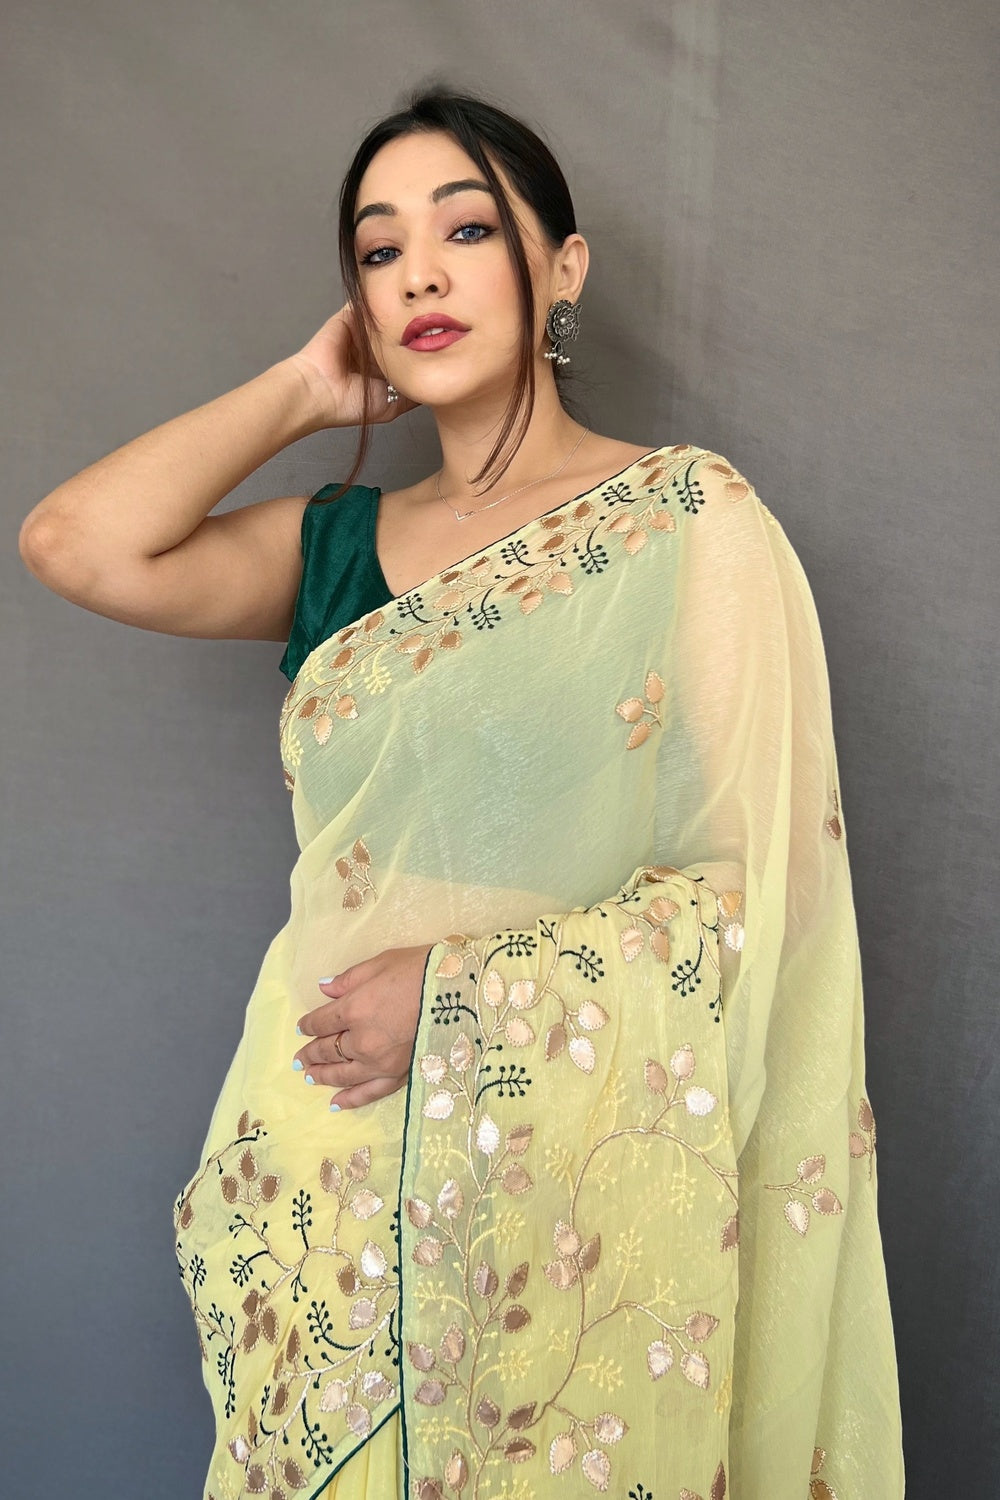 Yellow Chiffon Saree With Embroidered Work